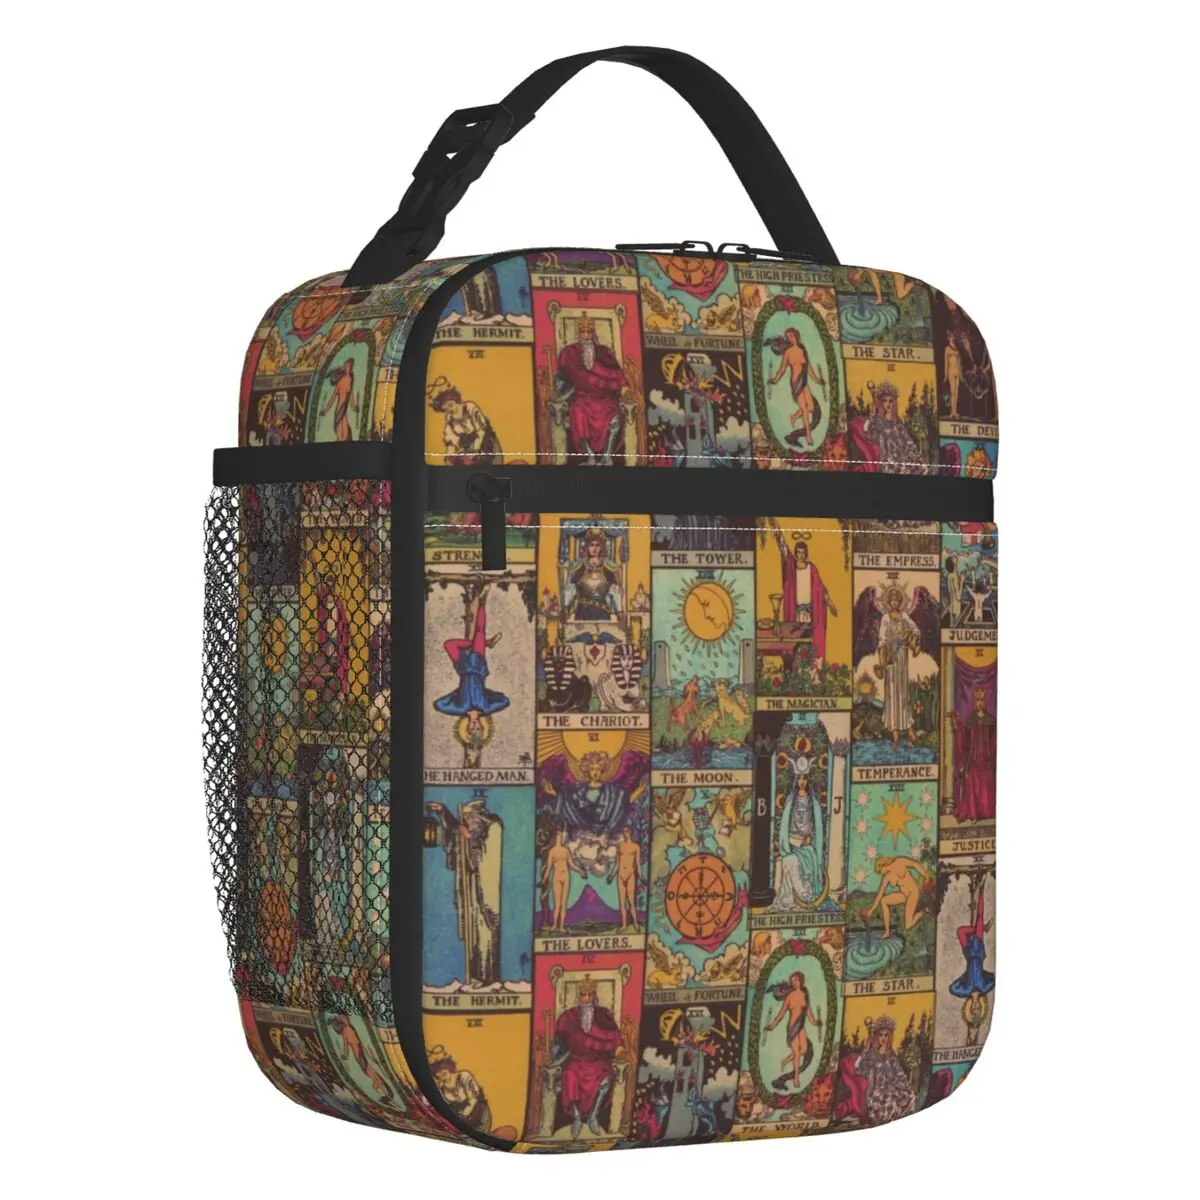 The Major Arcana Of Tarot Patchwork Insulated Lunch Bag Portable Occult Witch Thermal Cooler Bento Box Office Picnic Travel